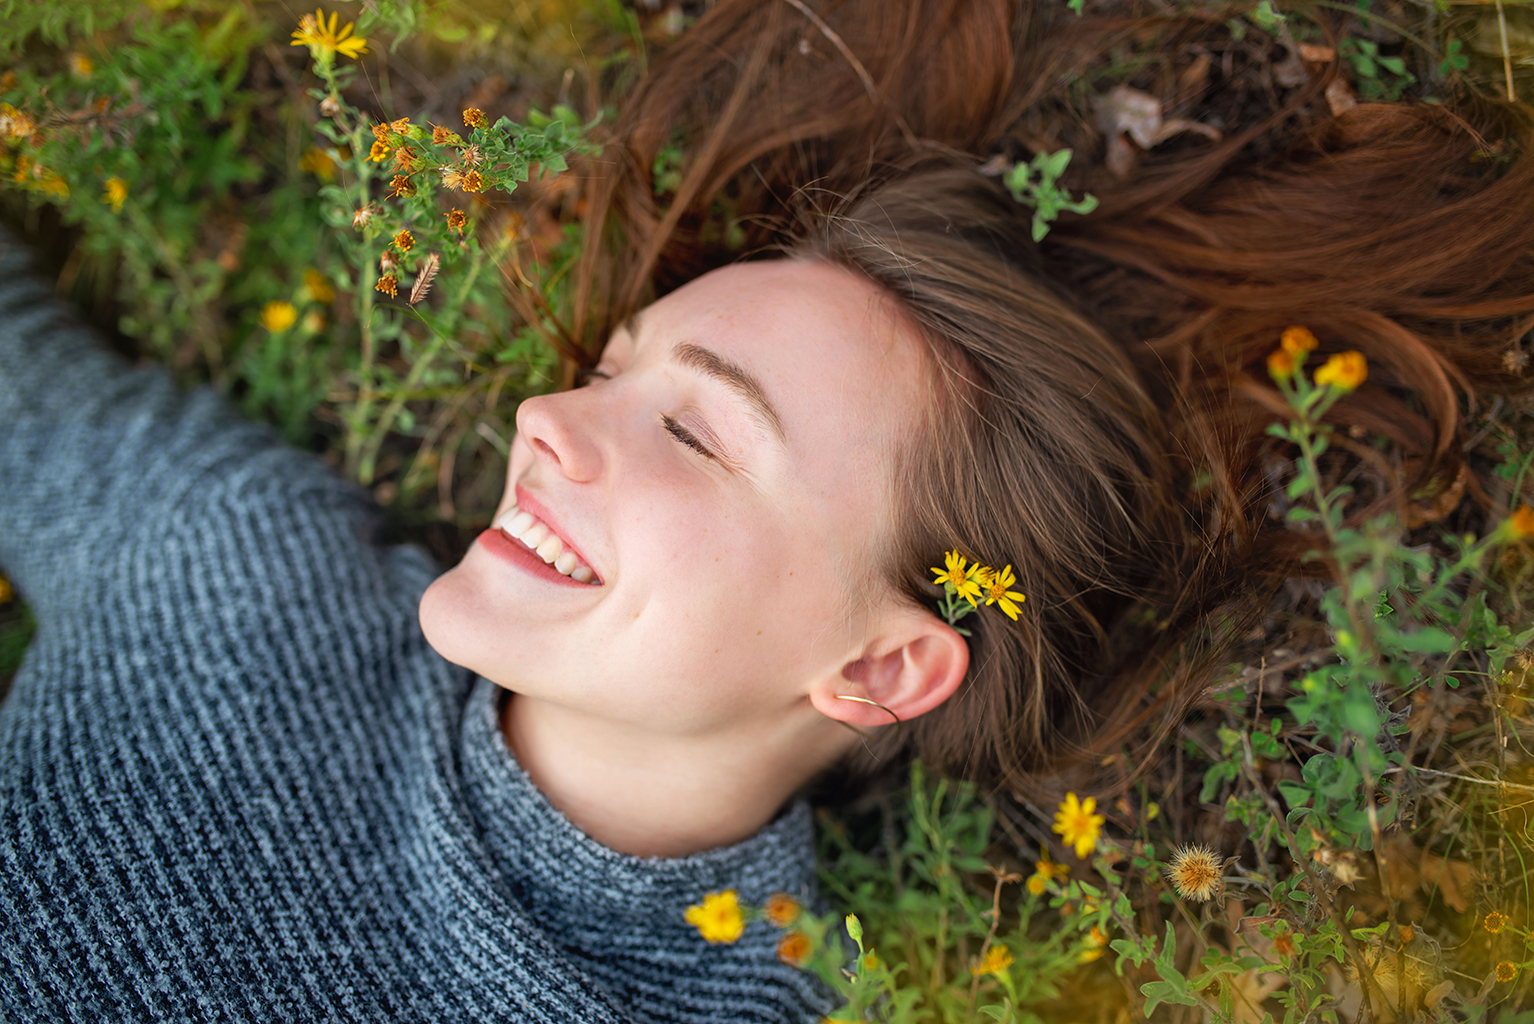 A young women laying down in a grass with flowers.